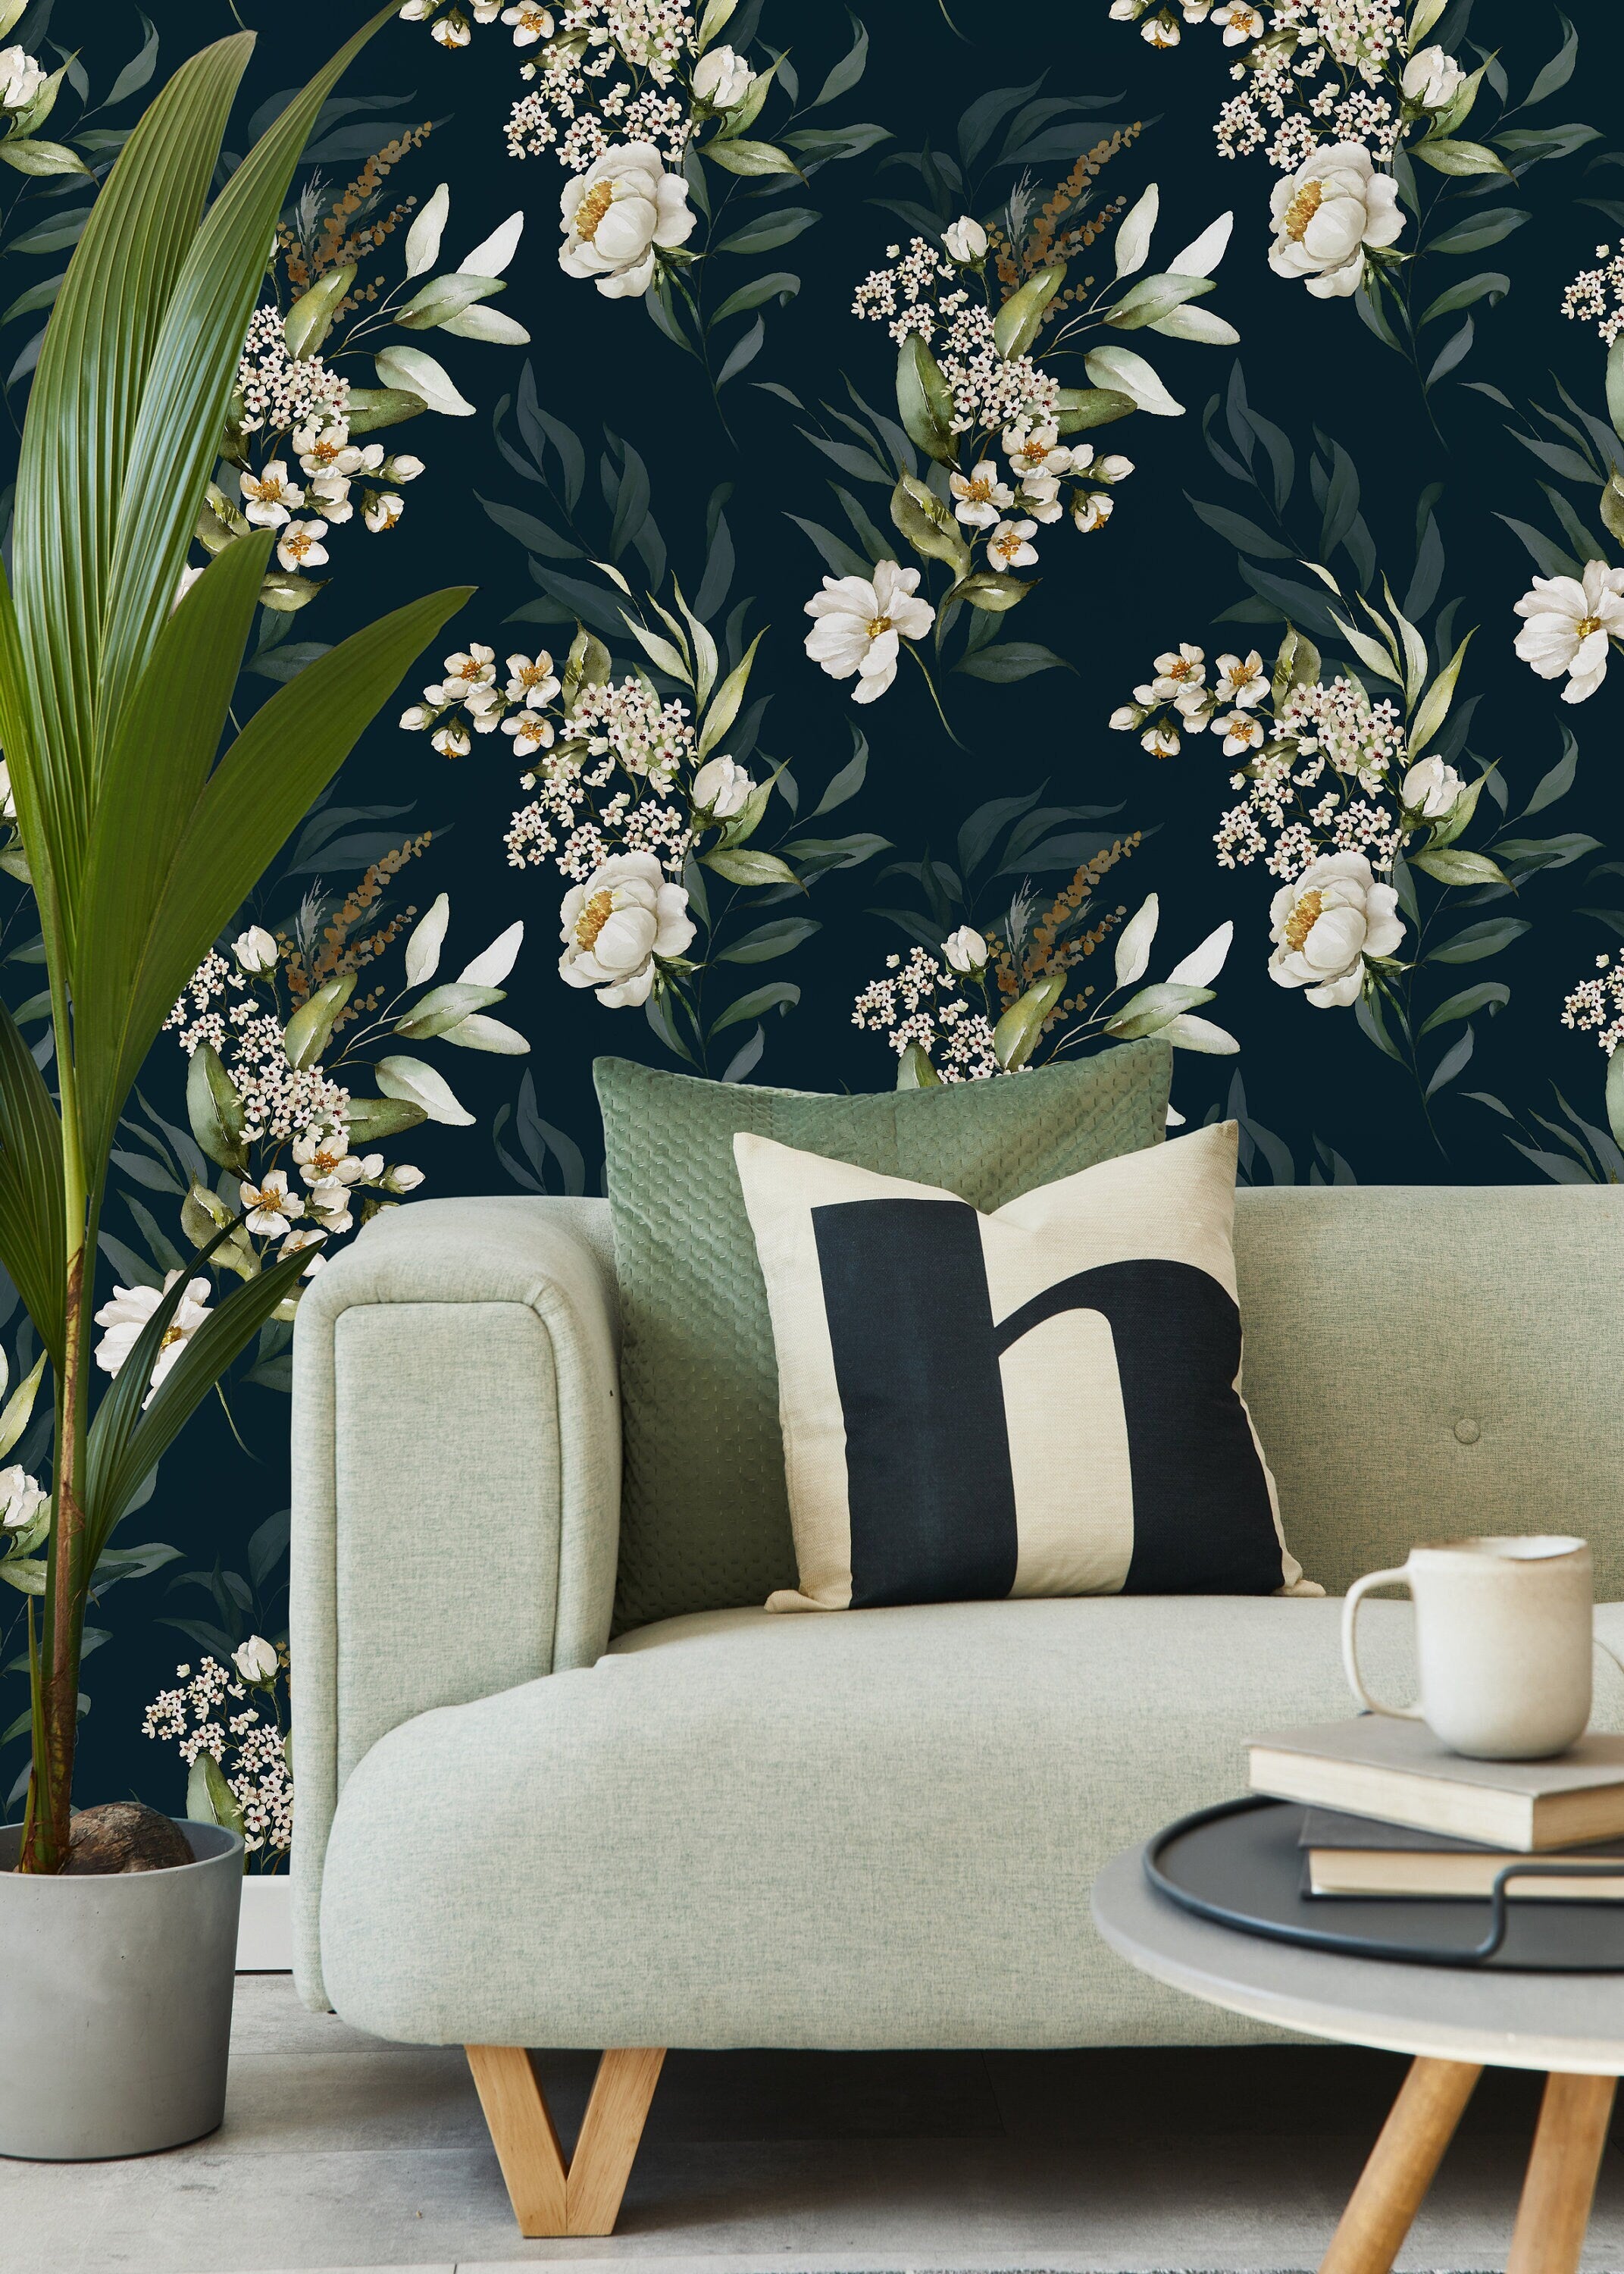 NextWall 3075sq ft Forest Green Vinyl Floral Selfadhesive Peel and Stick  Wallpaper in the Wallpaper department at Lowescom